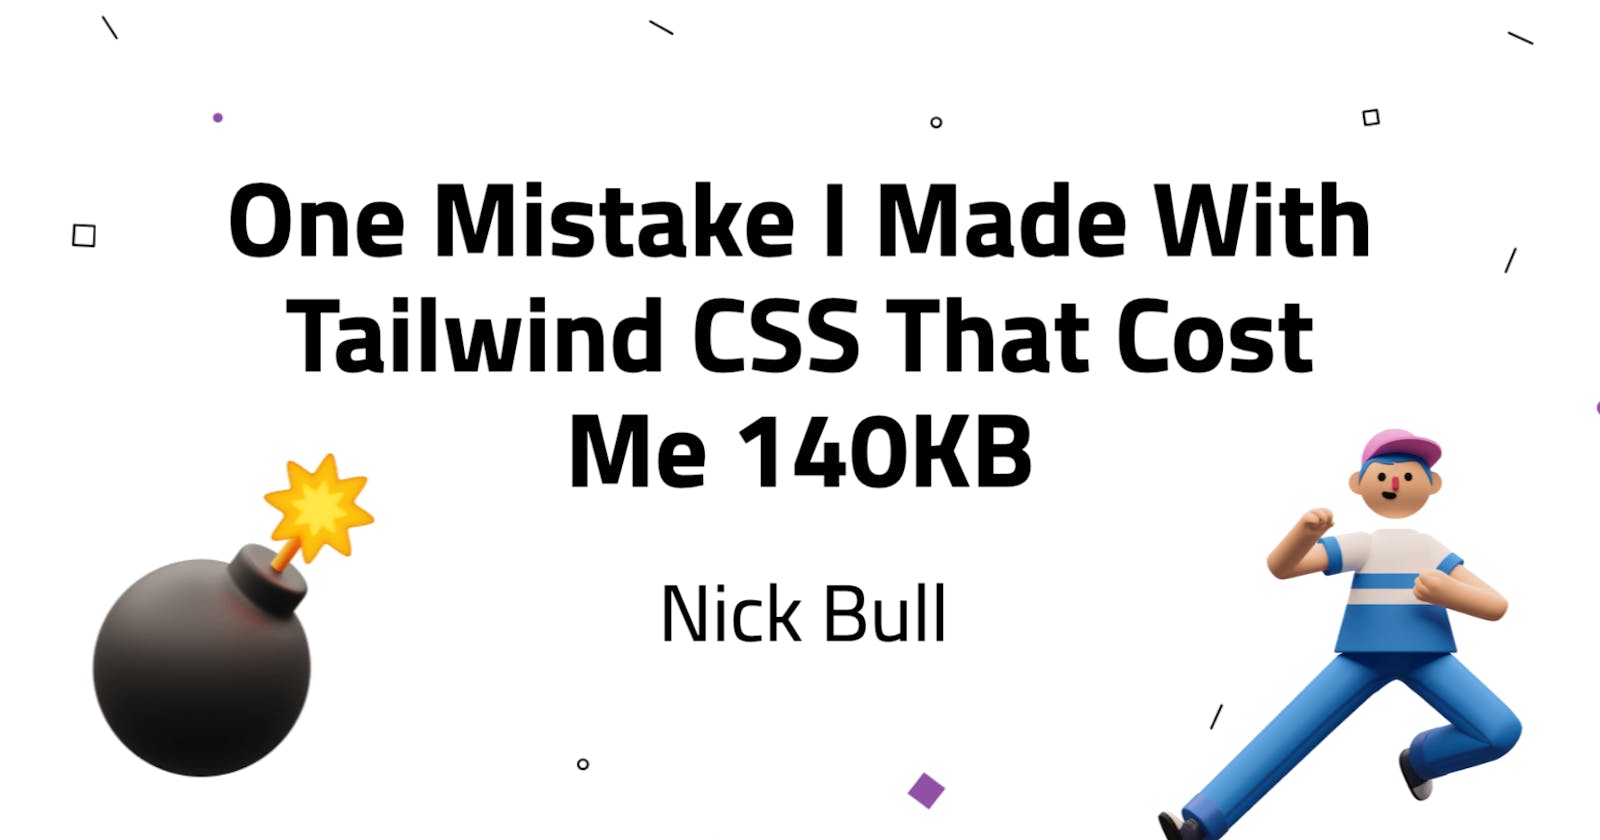 One Mistake I Made With Tailwind CSS That Cost Me 140KB